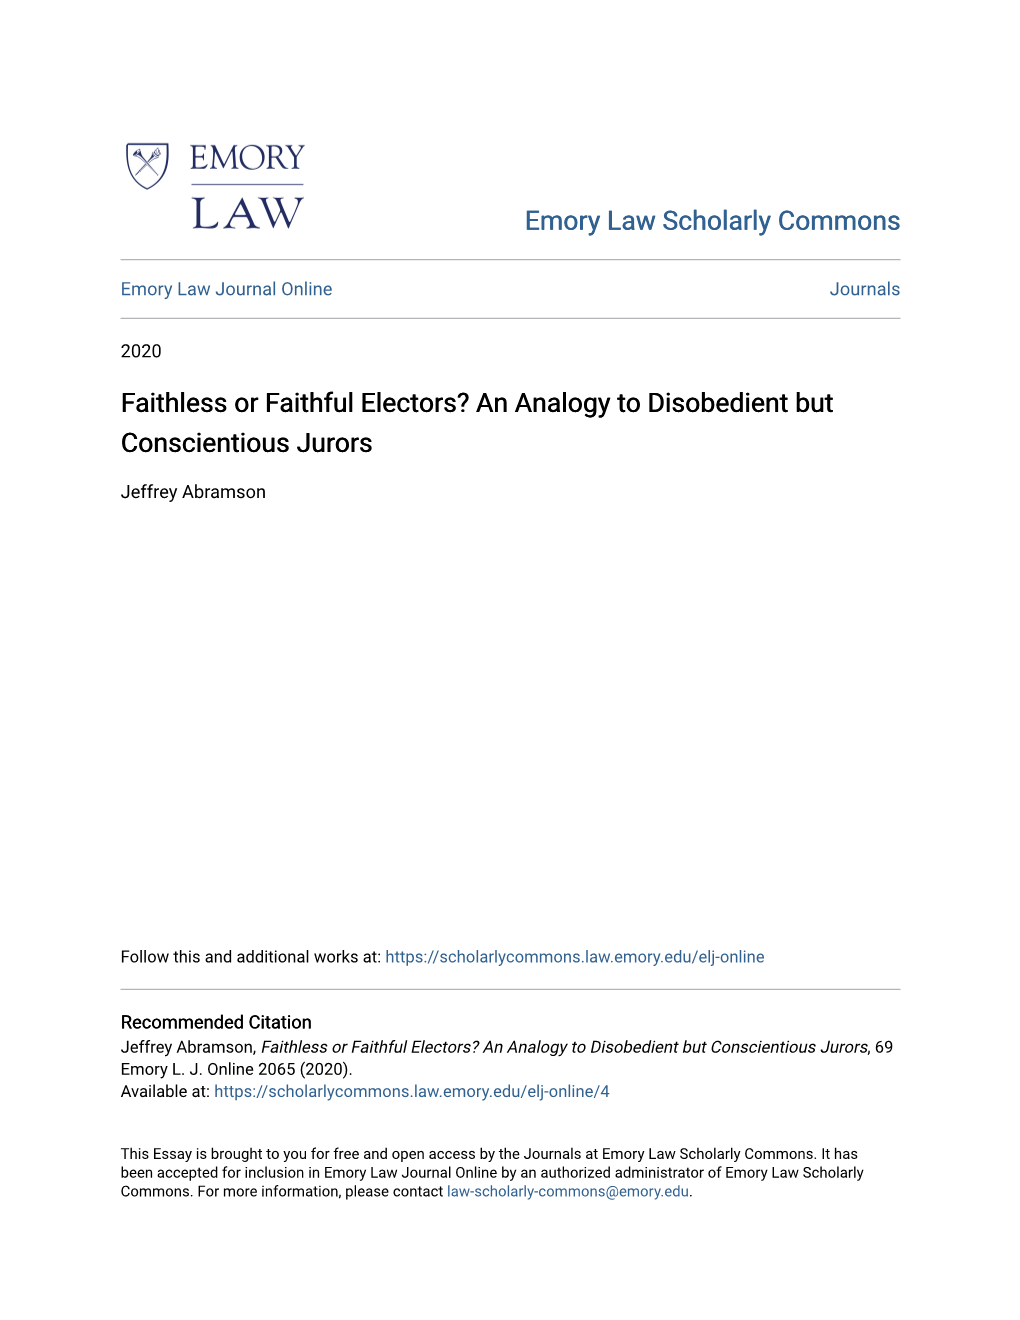 Faithless Or Faithful Electors? an Analogy to Disobedient but Conscientious Jurors